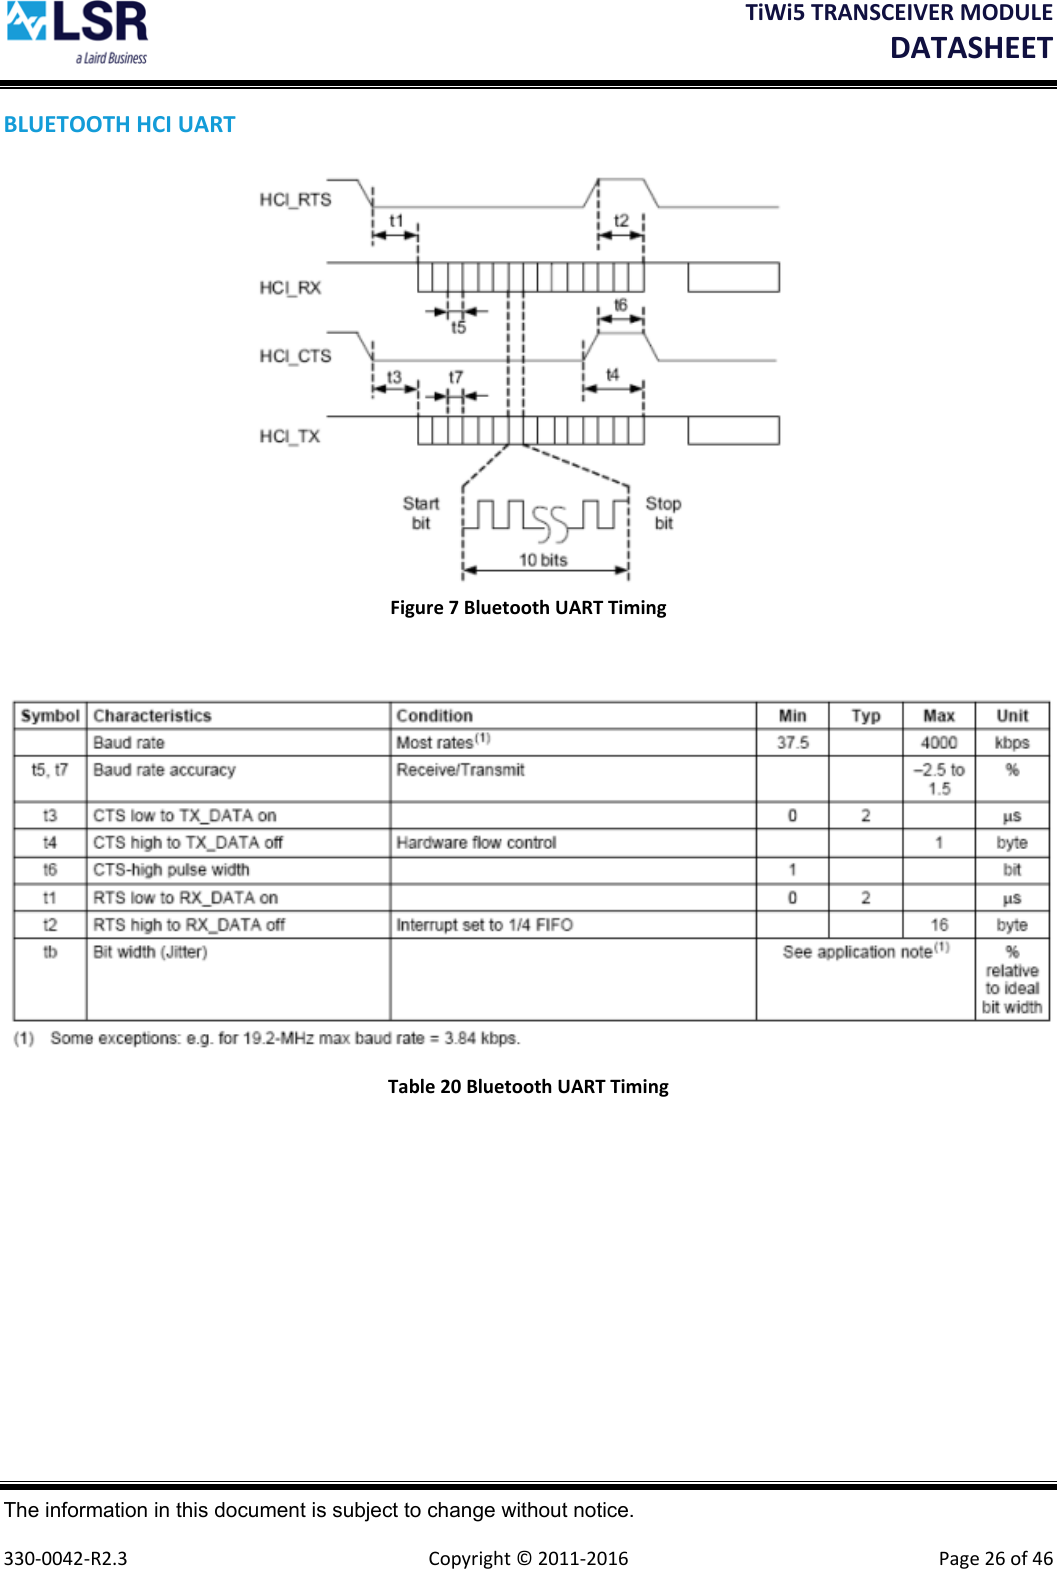 TiWi5TRANSCEIVERMODULEDATASHEET The information in this document is subject to change without notice.  330‐0042‐R2.3  Copyright©2011‐2016 Page26of46BLUETOOTHHCIUARTFigure7BluetoothUARTTimingTable20BluetoothUARTTiming